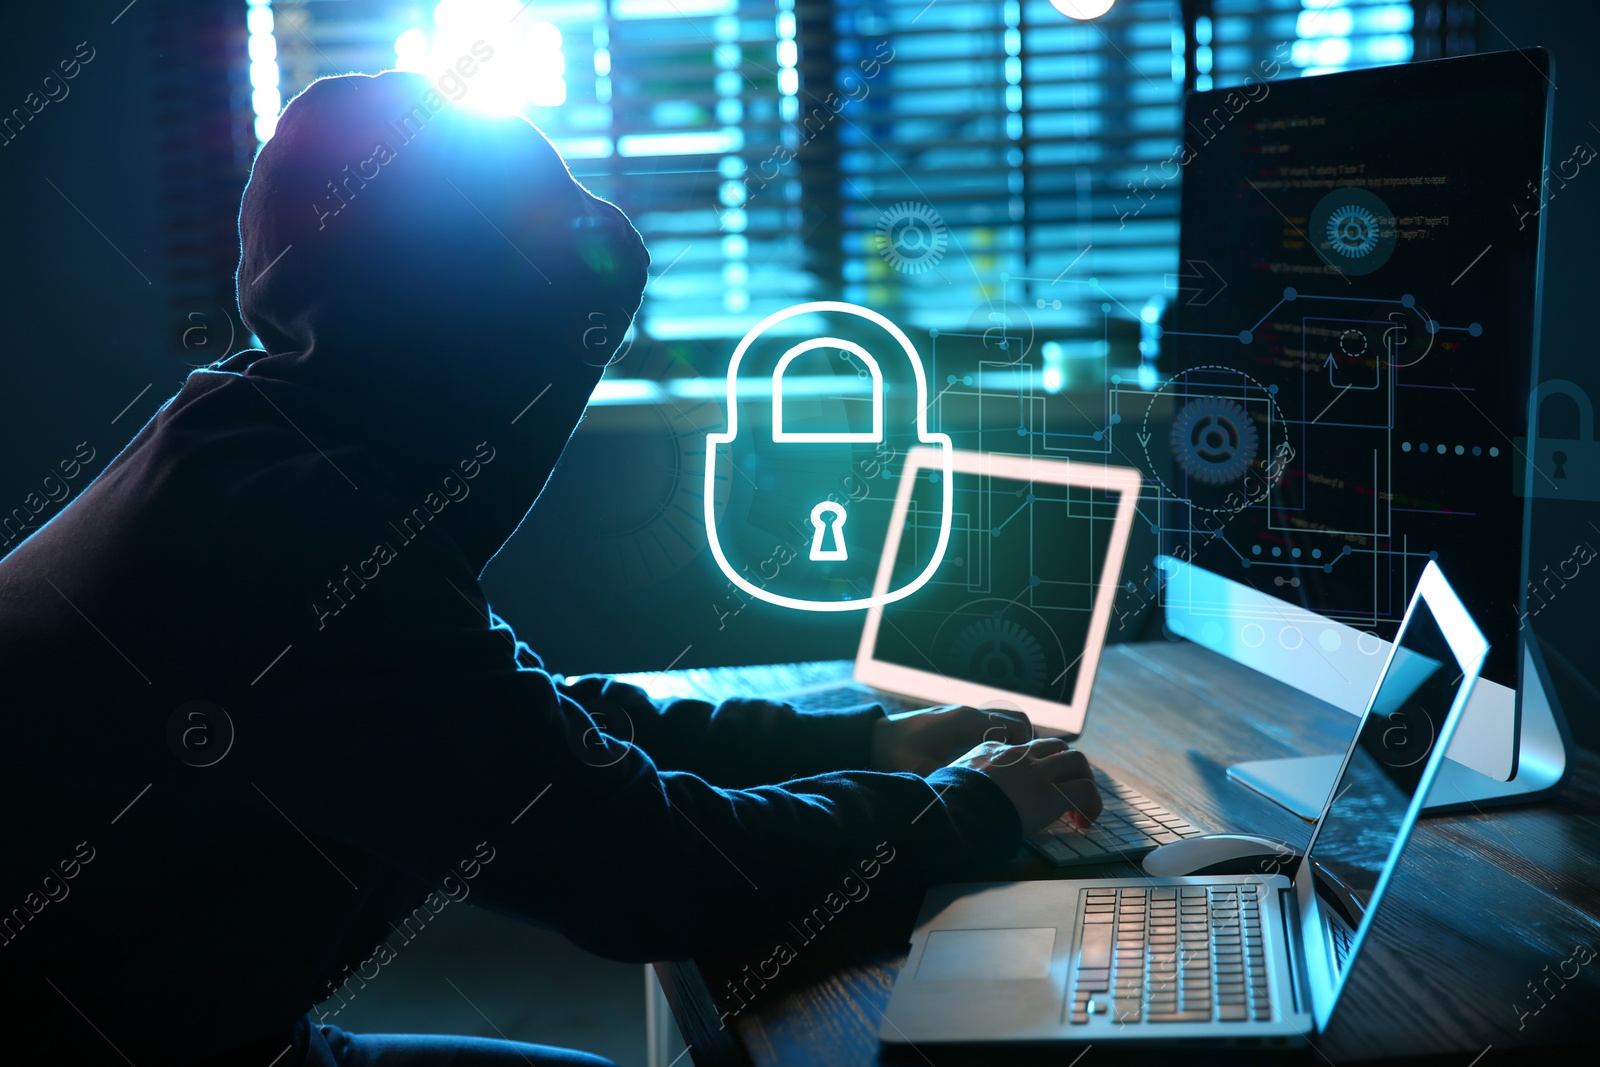 Image of Cyber attack protection. Hacker with computers in room. Lock illustration